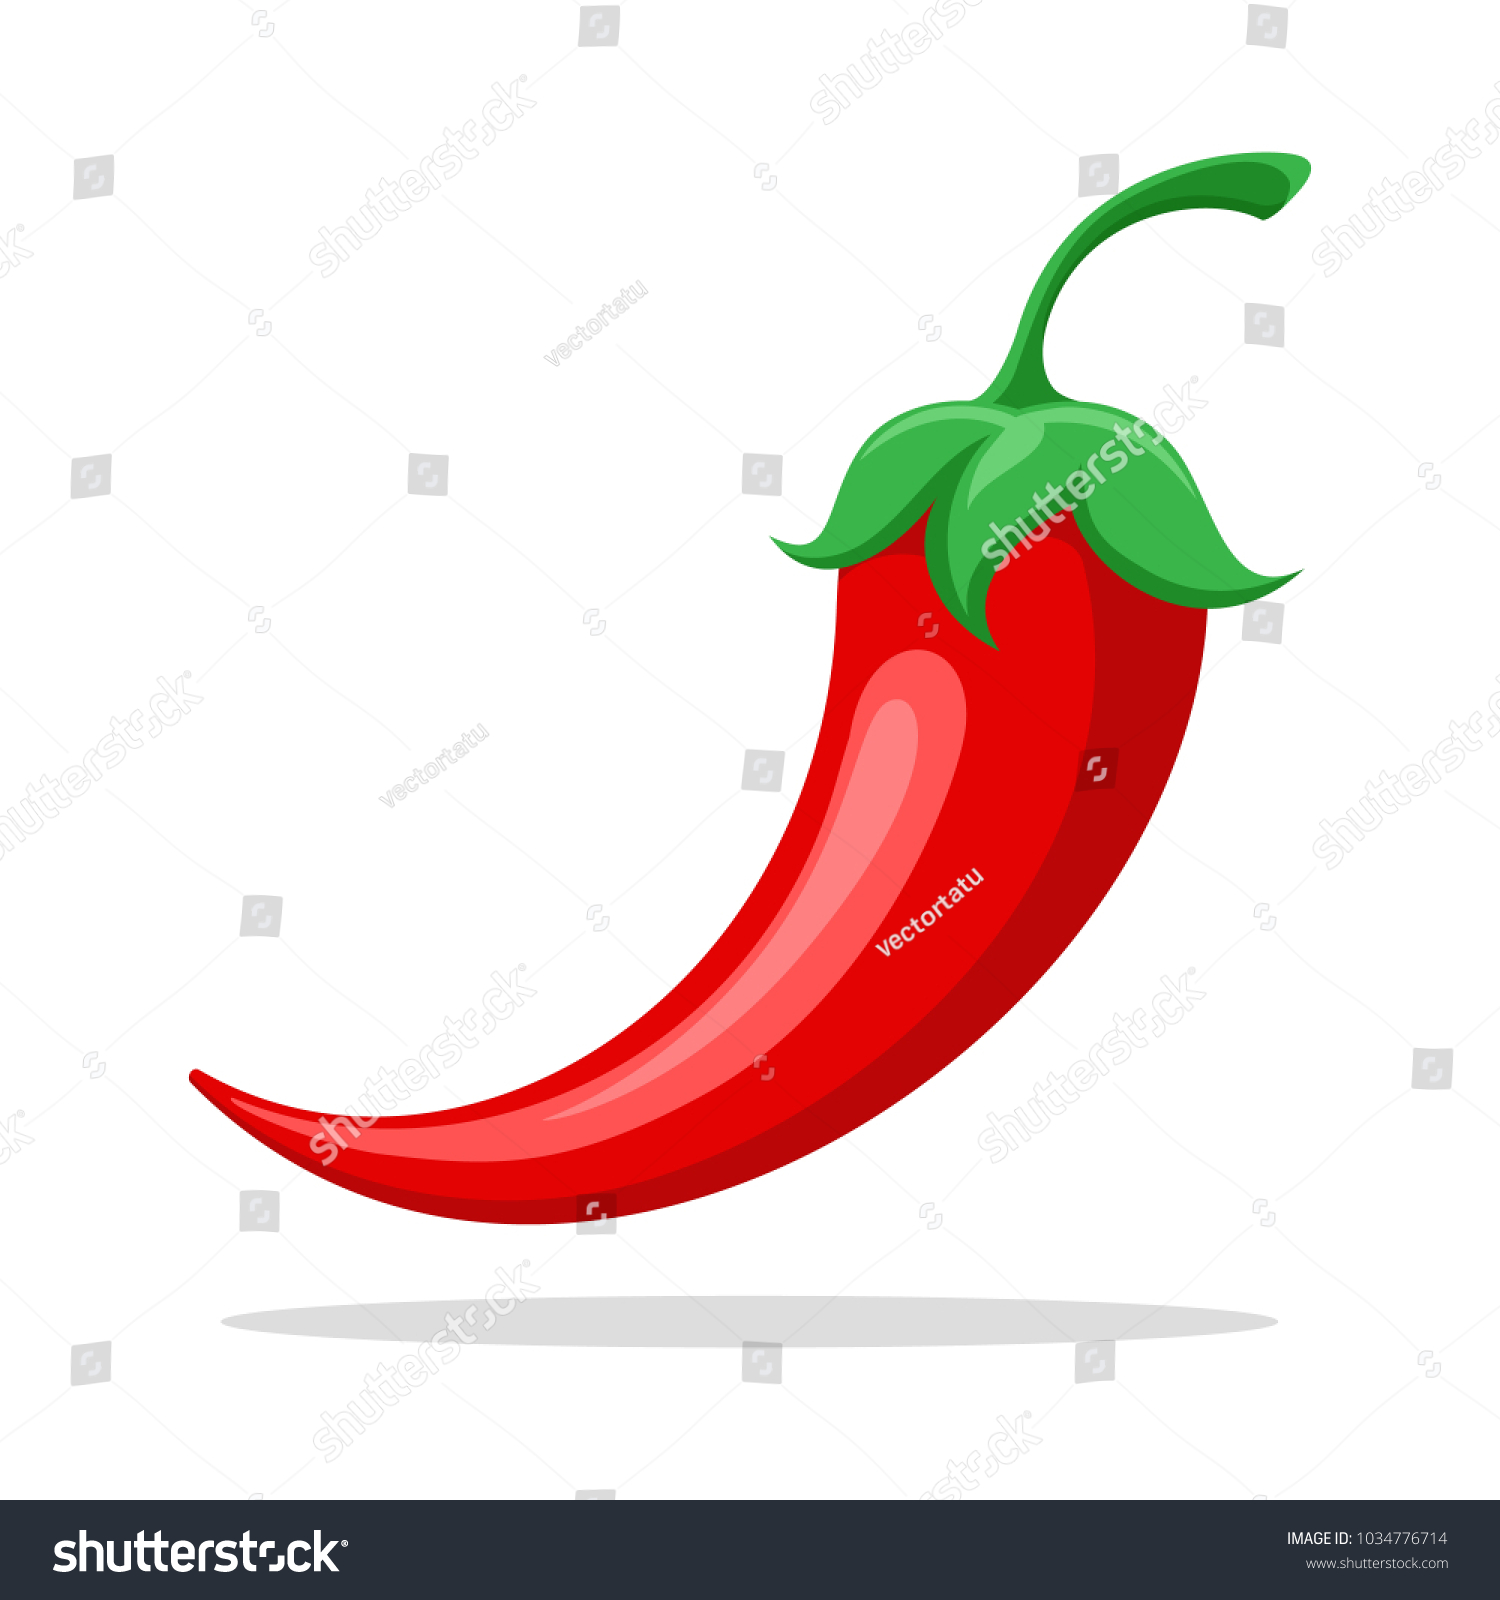 Spicy pepper. Savoury extra tabasco or cayenne red pepper closeup vector illustration #1034776714